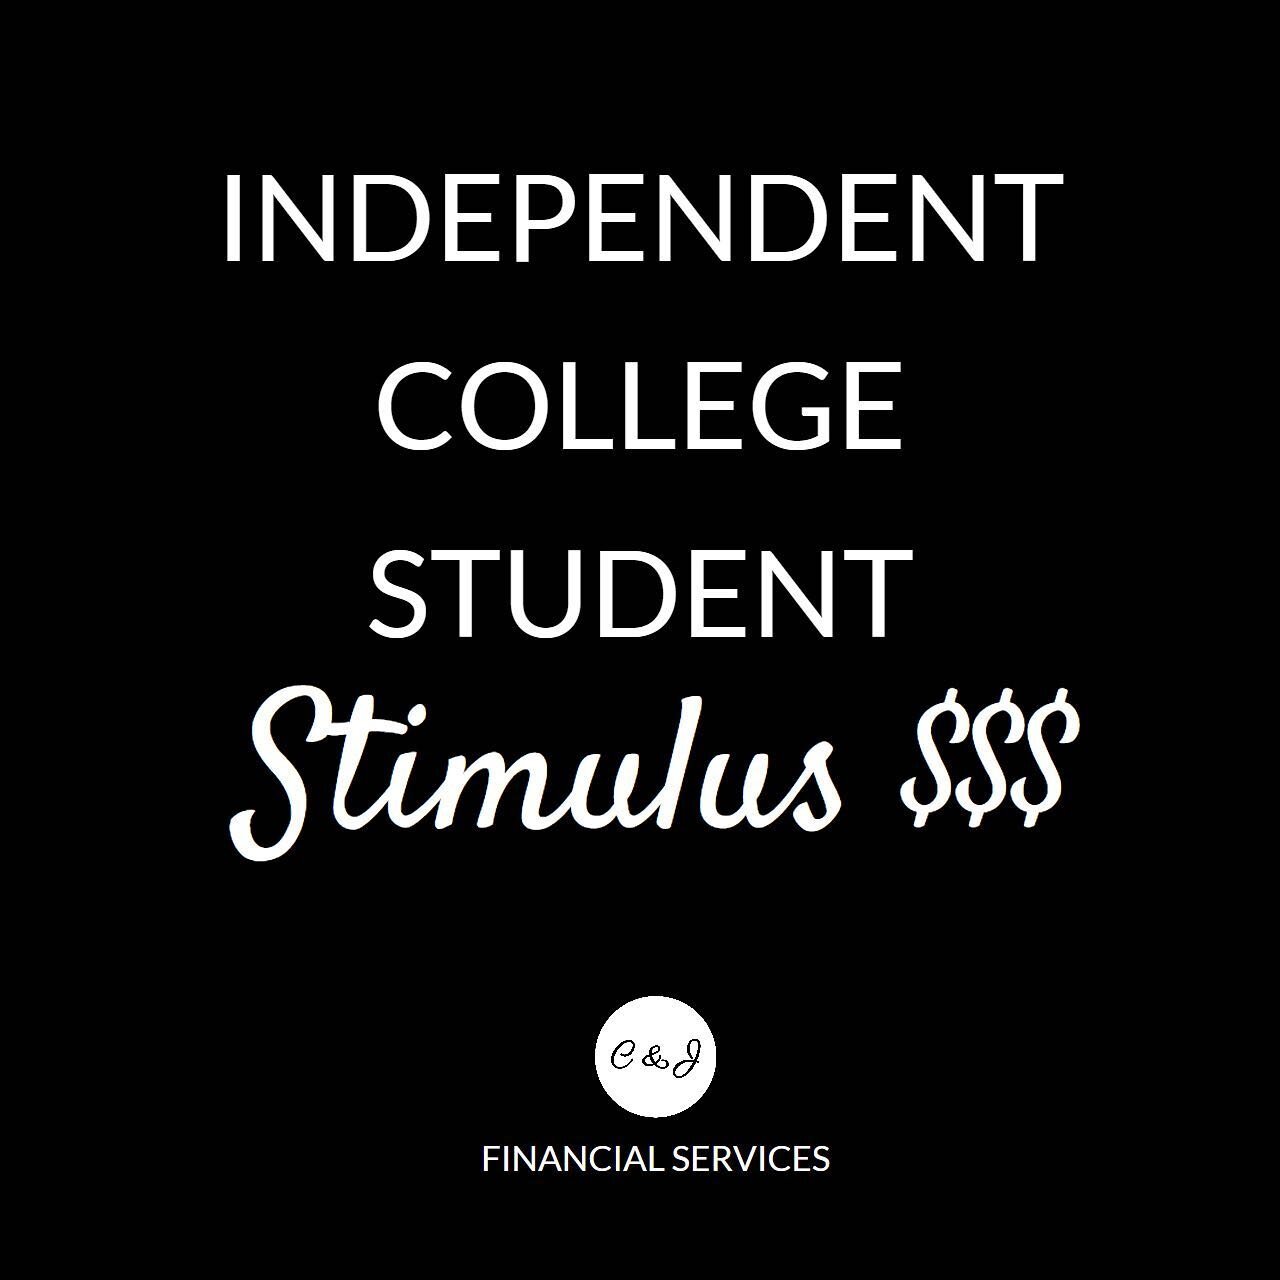 If you are an independent college student (not being claimed as a dependent on your parent&rsquo;s tax returns) you may qualify for a $1200 federal stimulus payment provided by the CARES Act. If you did not automatically receive this payment (due to 